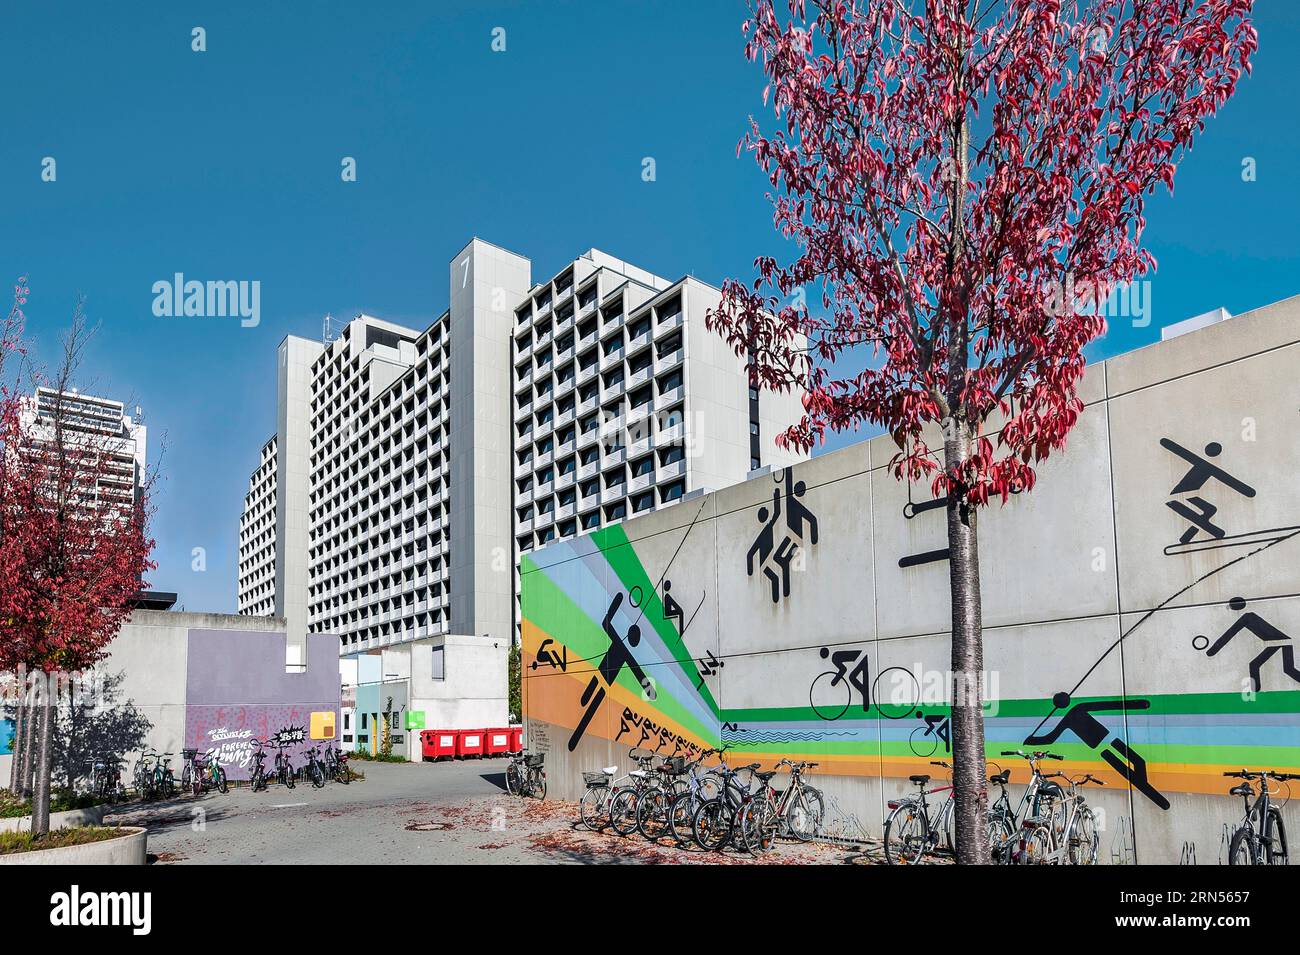 Sports symbols, pictograms and high-rise building, Olympic Village, Munich, Upper Bavaria, Bavaria, Germany Stock Photo